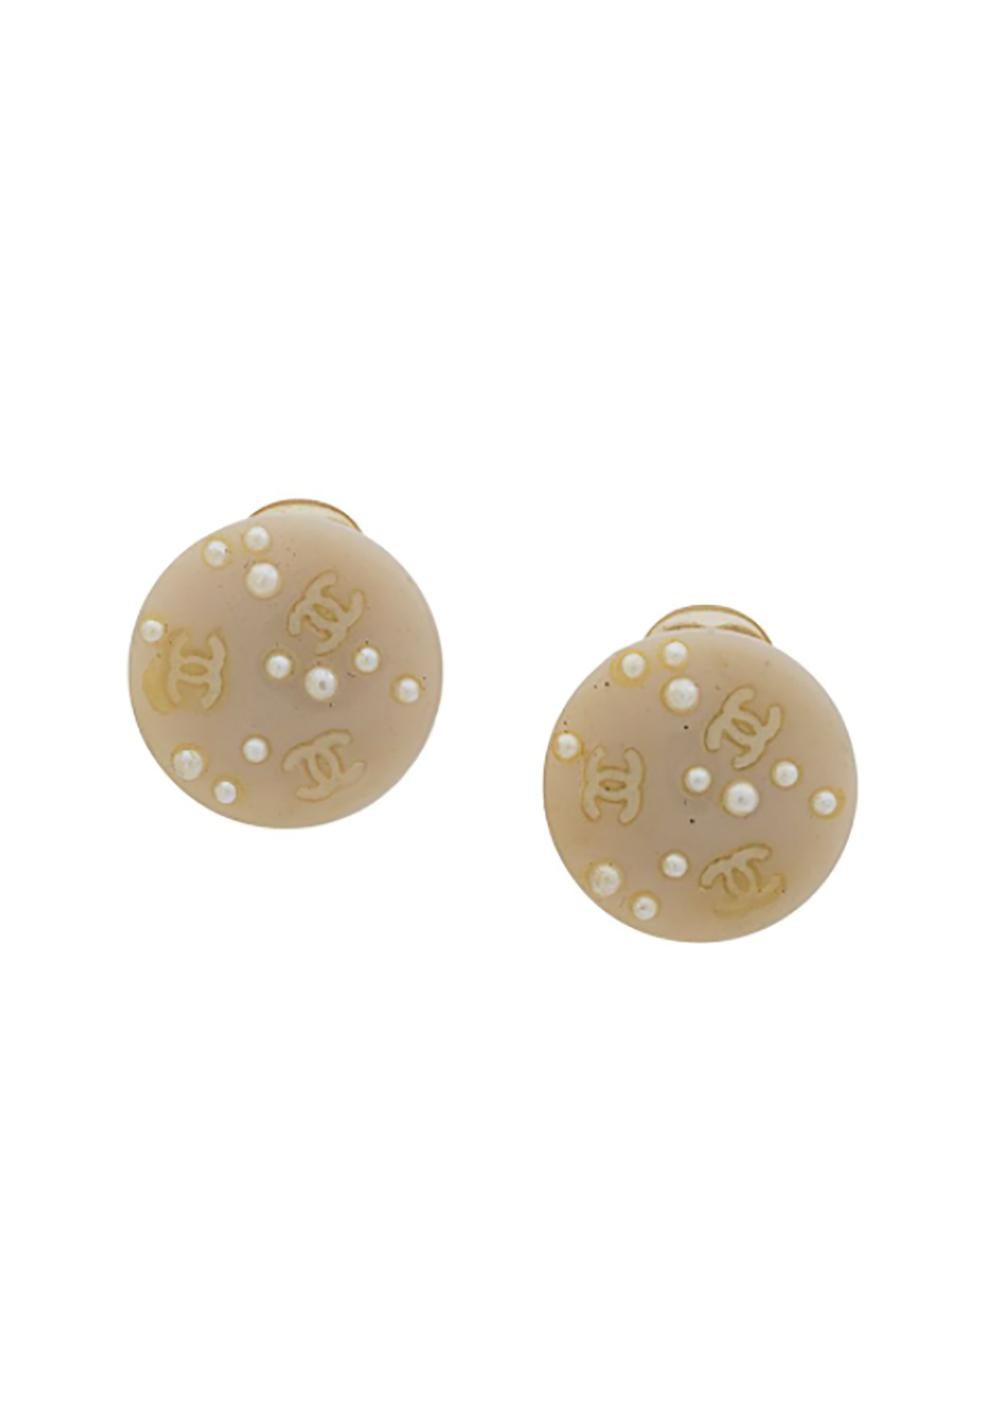 2003 beige Chanel logo clip-on earrings featuring faux-pearls embellishment, signature interlocking CC logo, , a back claps earring, a back logo plaque. 
These earrings come as a pair.
Diameter: 1.7cm
In good vintage condition. Made in France.
We